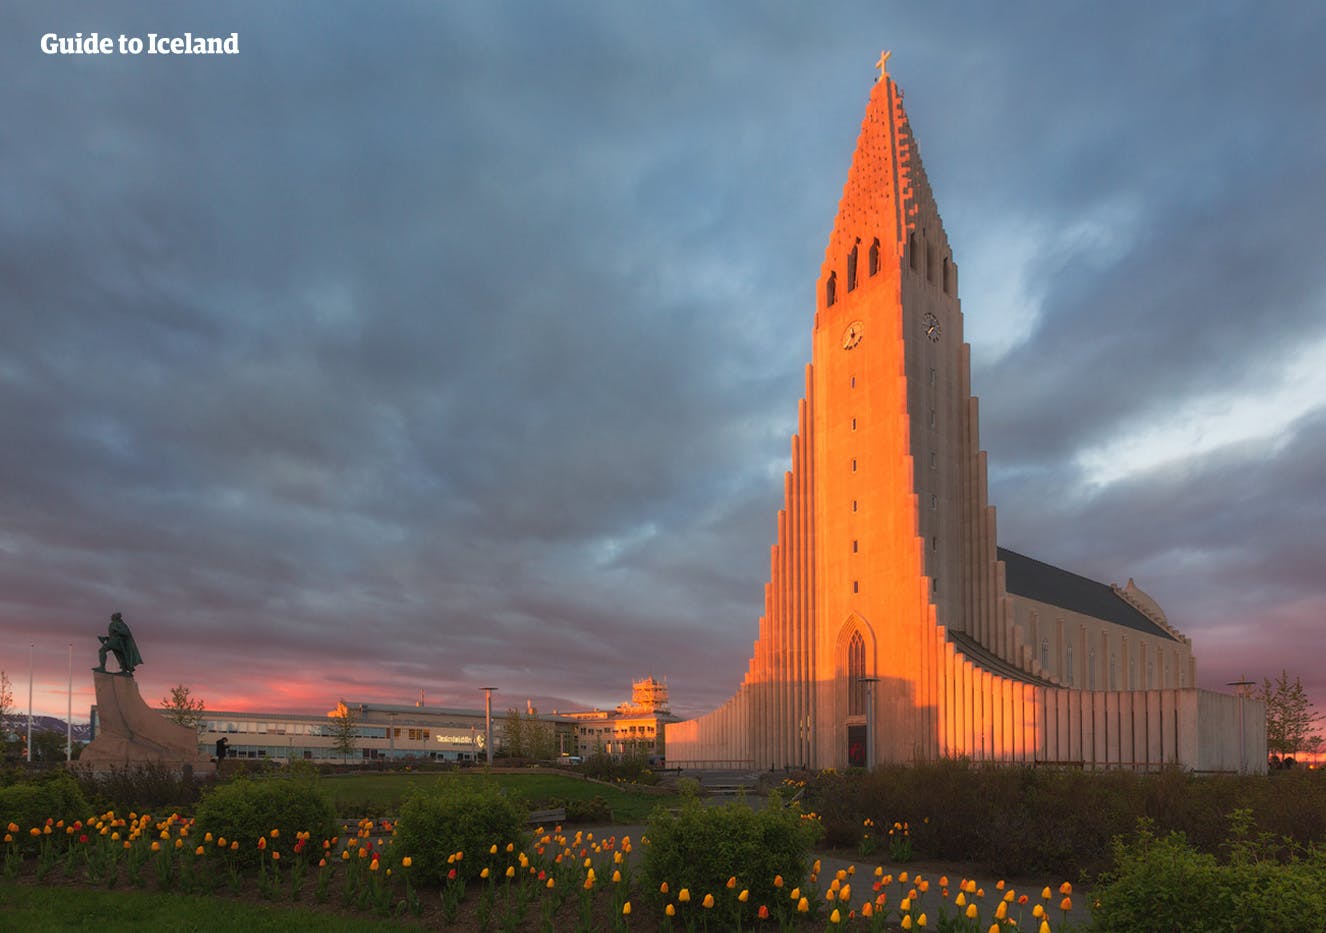 Free days are easy to fill in Reykjavik; the city boasts countless cultural highlights to occupy your time.